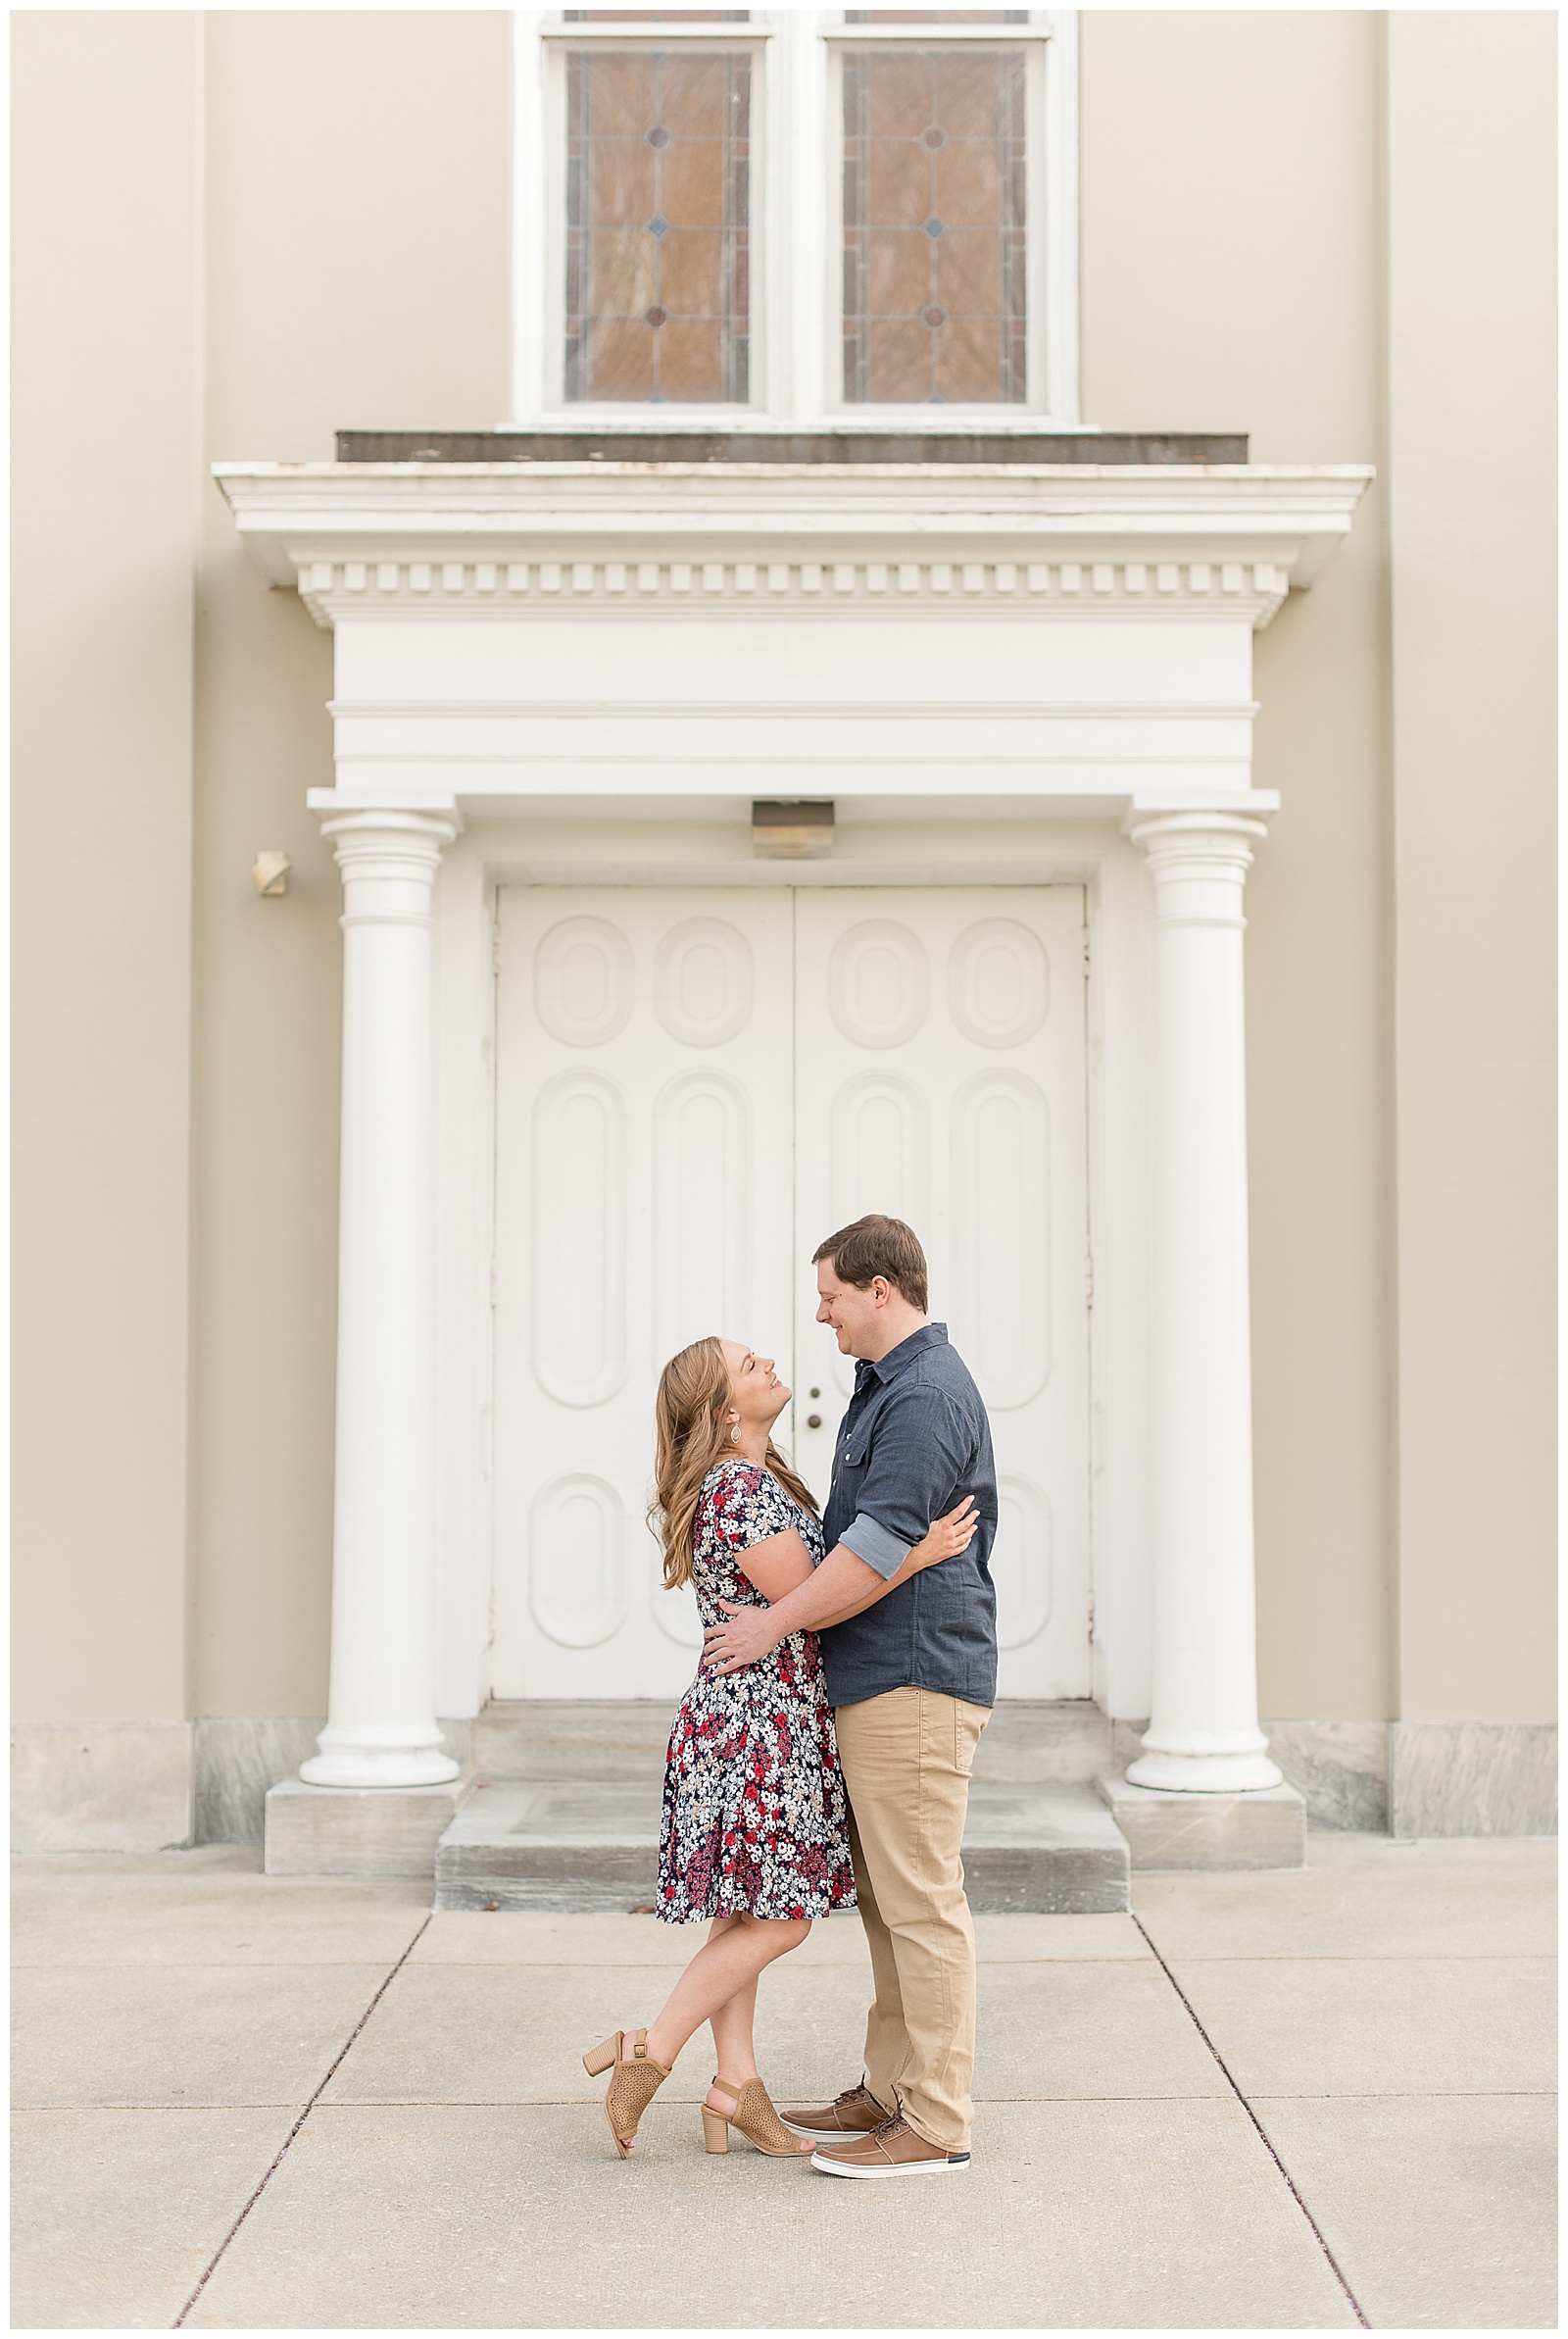 engaged couple standing on sidewalk in front of tan home with large white front door with white columns on bright evening as they hug and smile